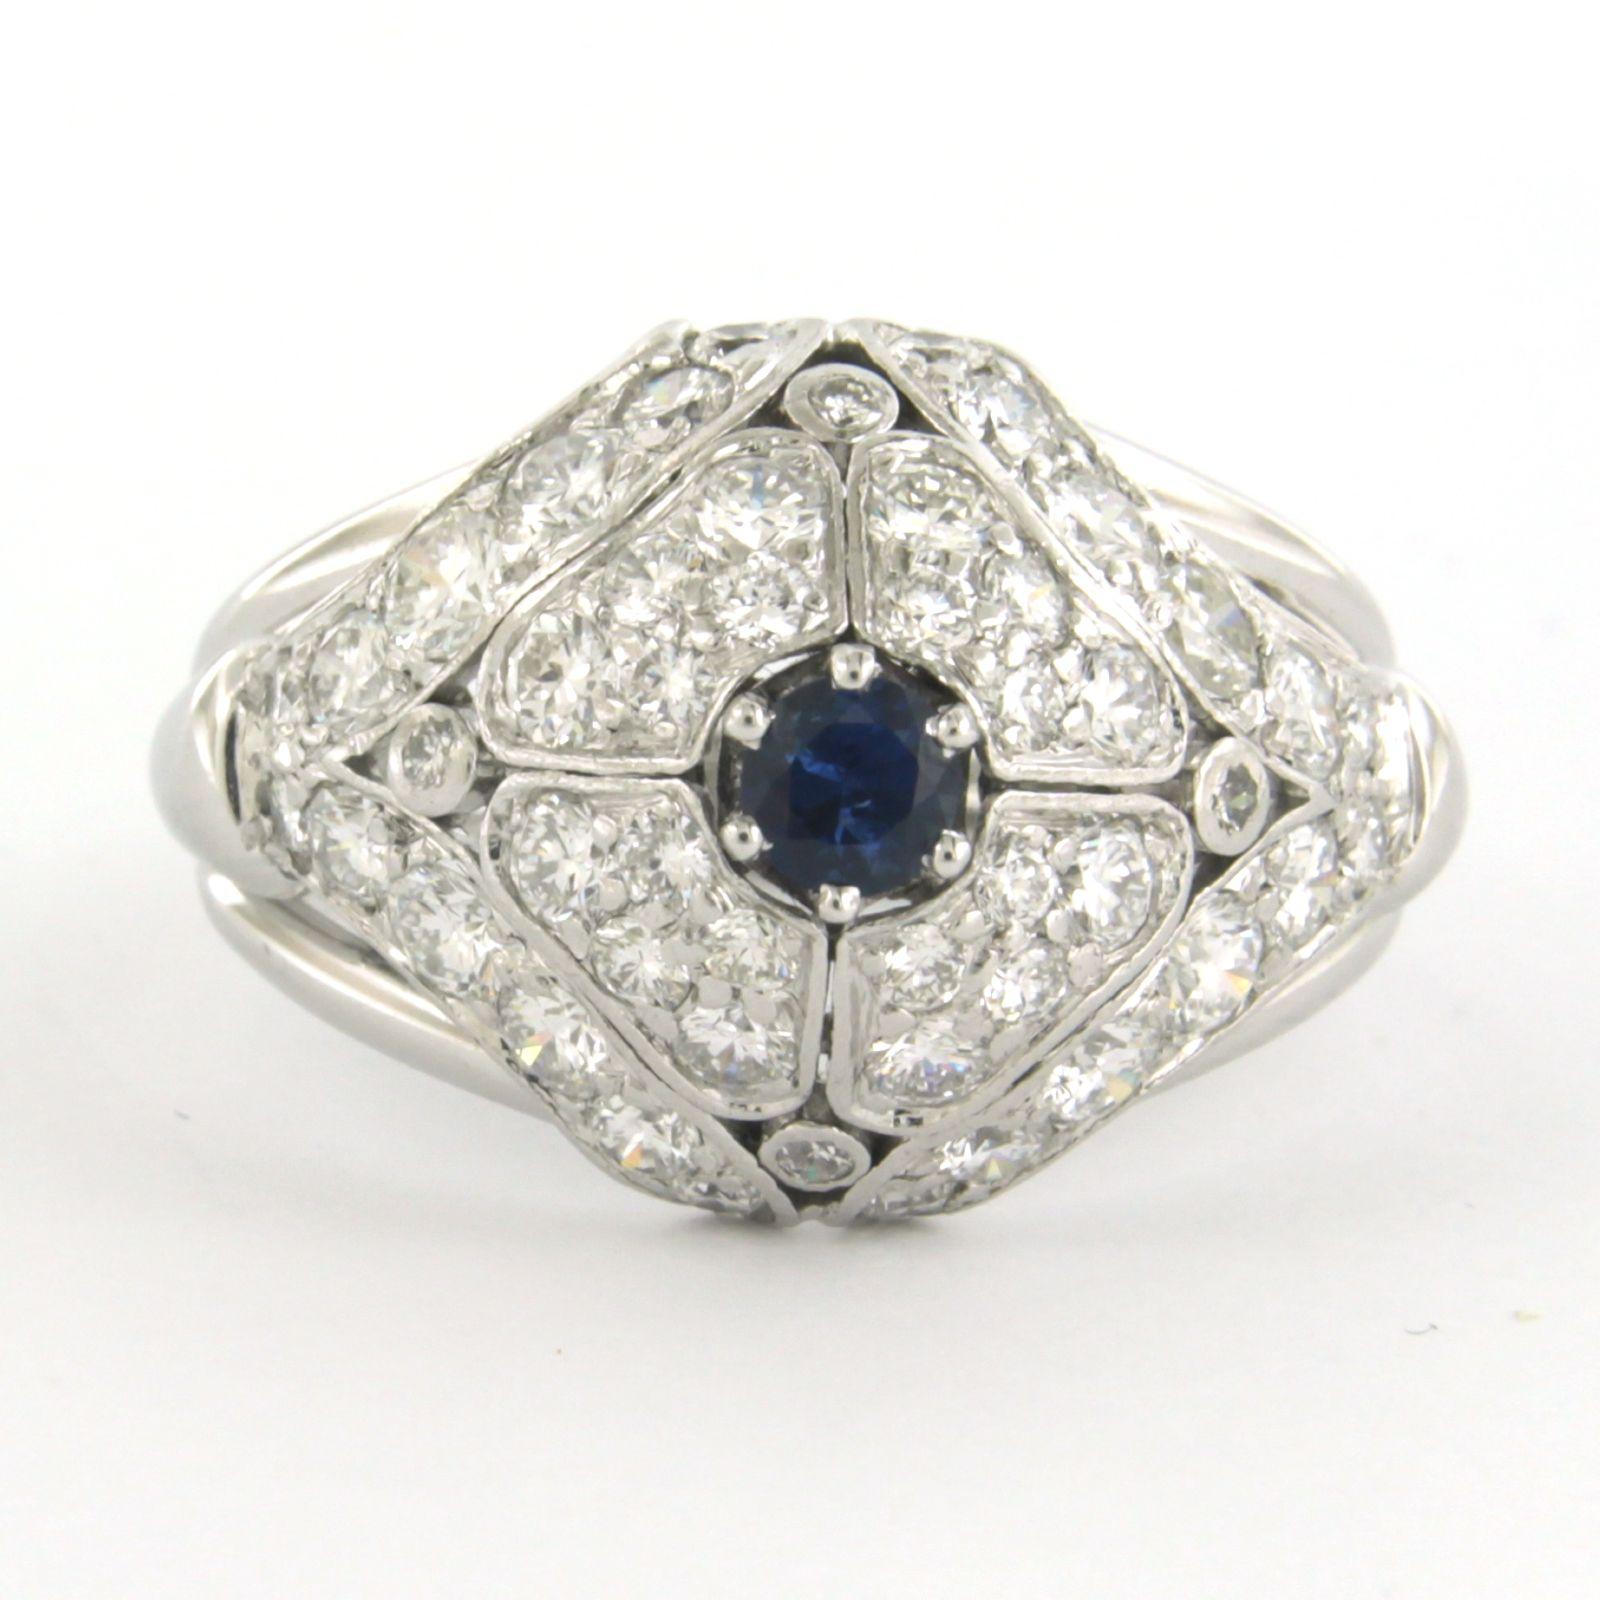 14k white gold ring set with sapphire and brilliant cut diamond. 2.00ct - F/G - VS/SI - ring size U.S. 9.25 - EU. 19 (60)

detailed description:

the top of the ring is 1.6 cm wide by 8.6 mm high

weight 8.9 grams

ring size US 9.25 - EU. 19 (60),